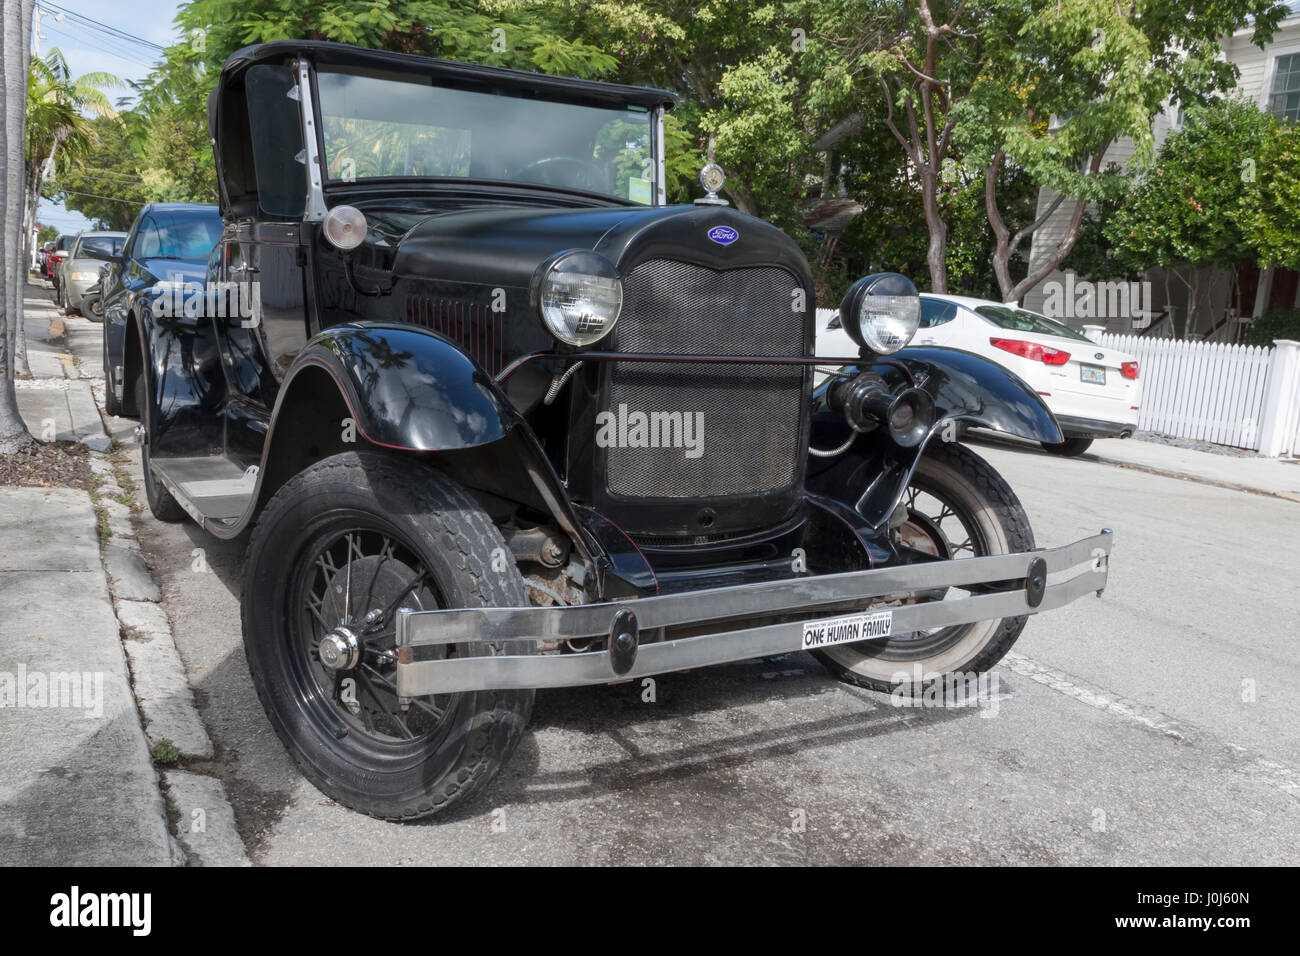 Shay Model A Roadster, a fiberglass reproduction of a Ford Model A placed on a modern chassis, parked on the street. Stock Photo